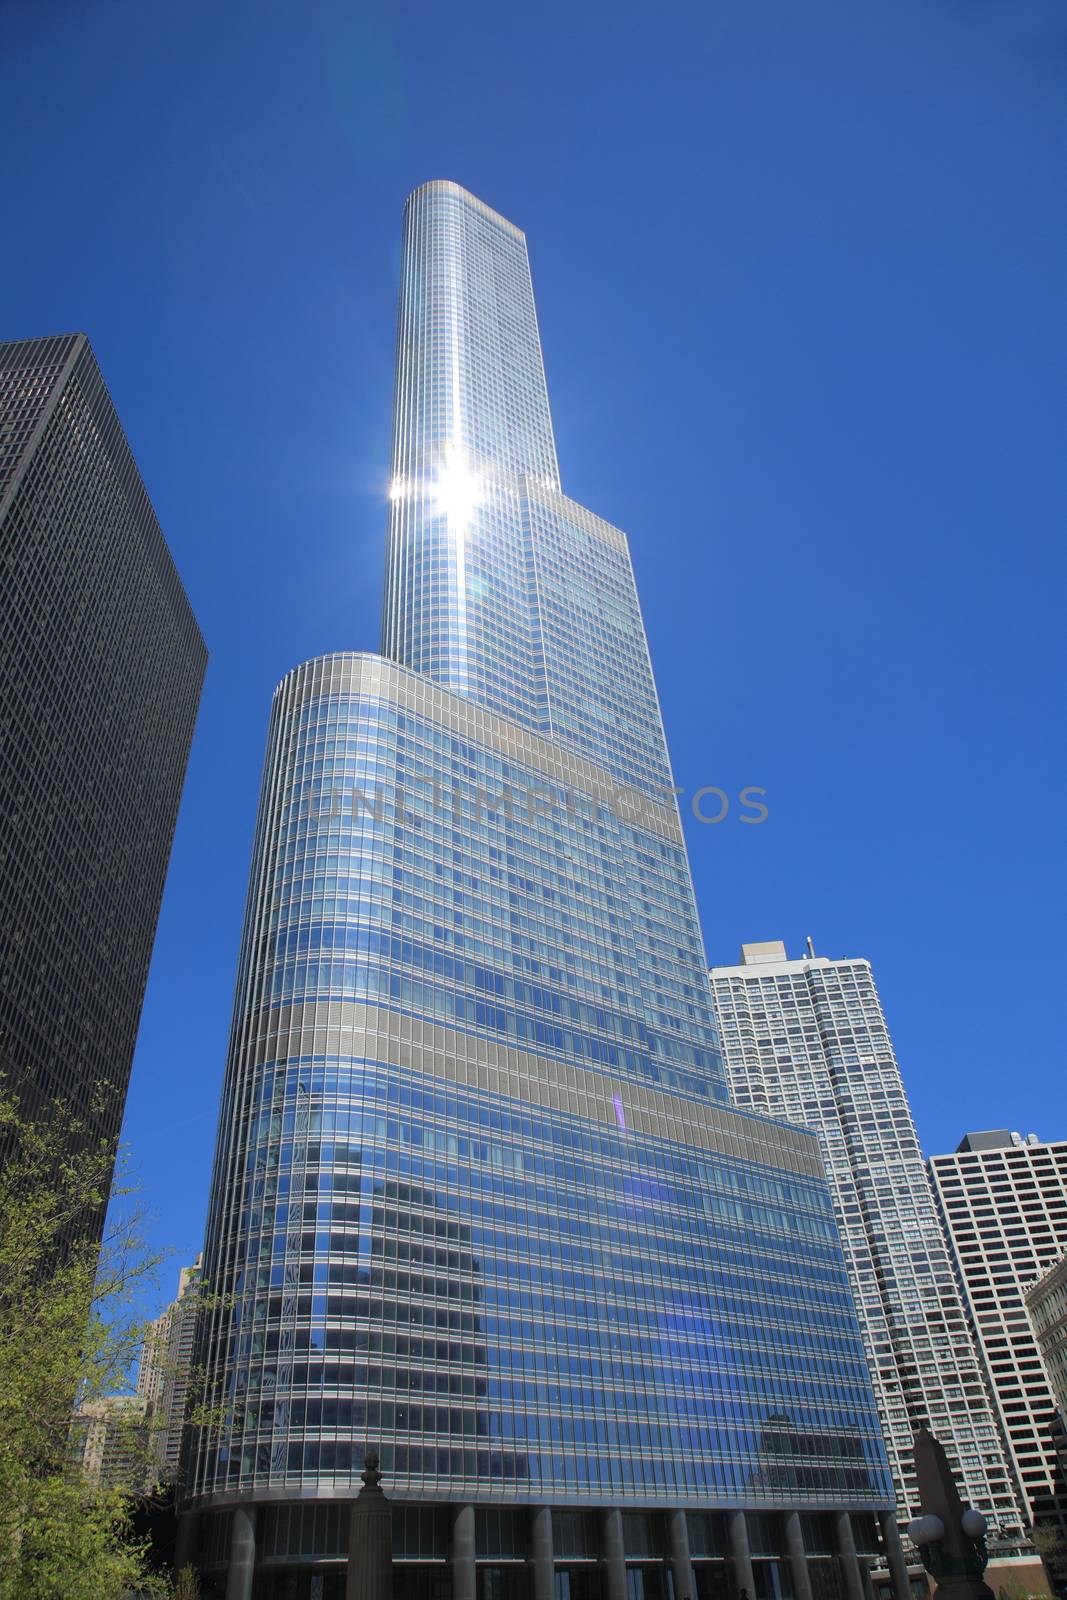 Trump International Hotel and Tower, with sunlight reflections, in the Chicago skyline.